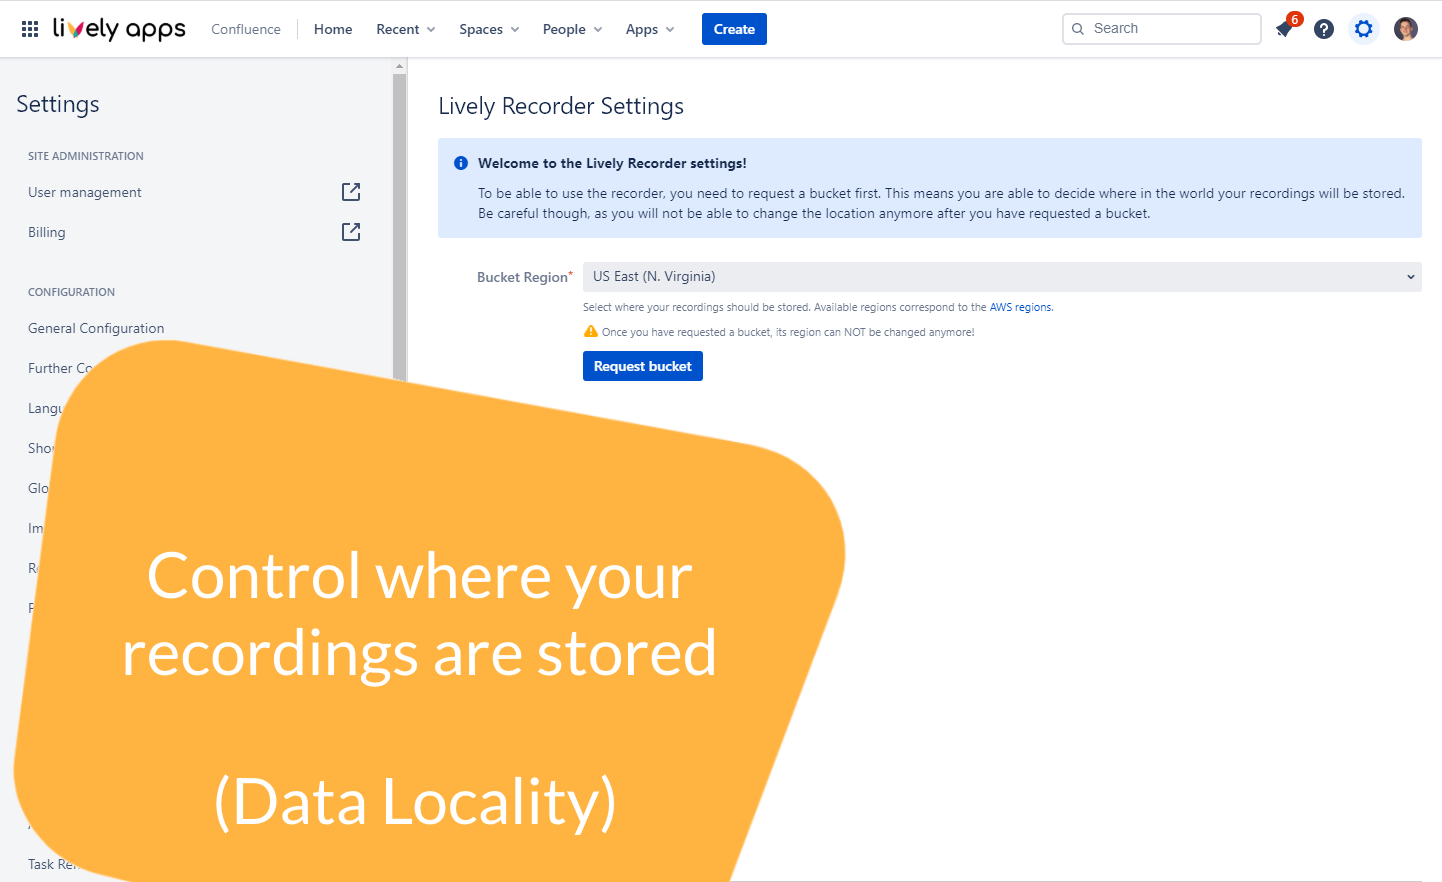 Choose where in the world your data should be stored